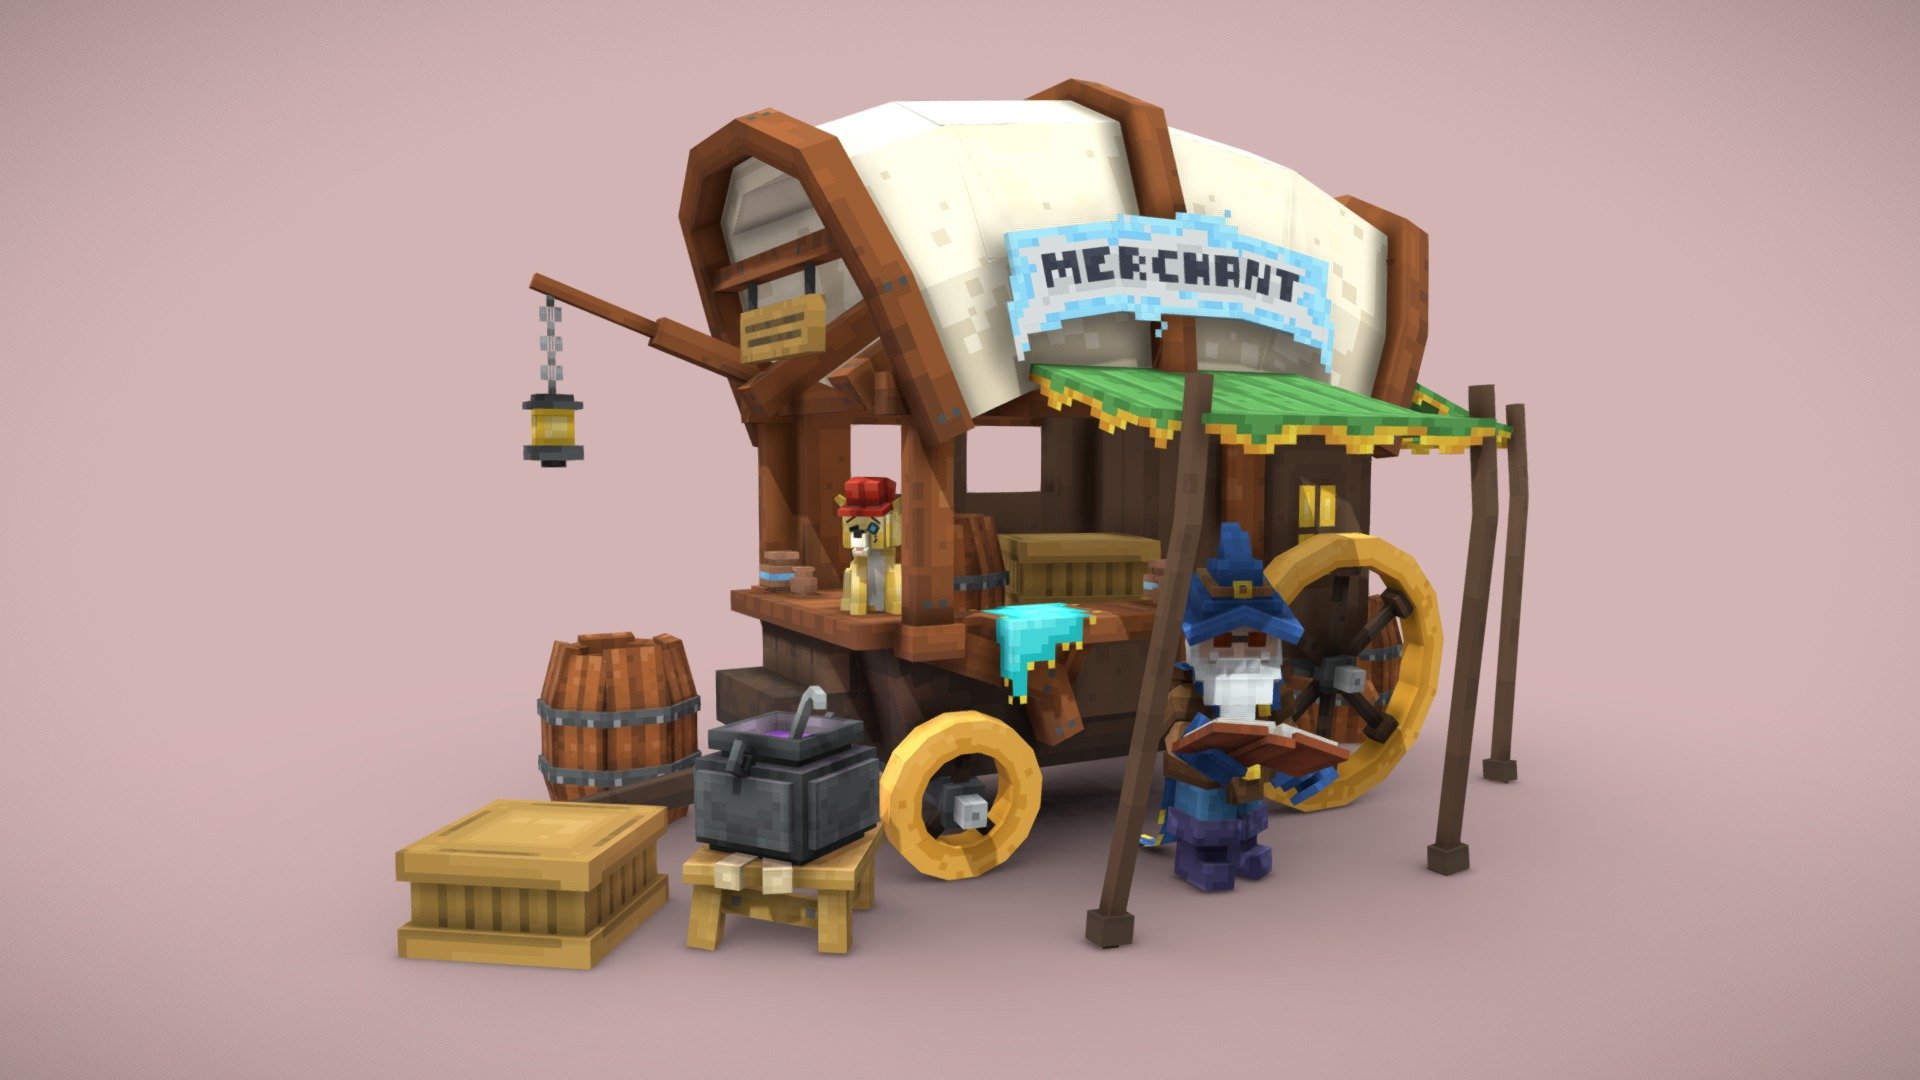 Merchant and his cart wandering through different cities in search of new and better deals! This magical merchant might be able to offer more than what meets the eye&hellip; ;) - Cart and Merchant scene - 3D model by nitsan 3d model